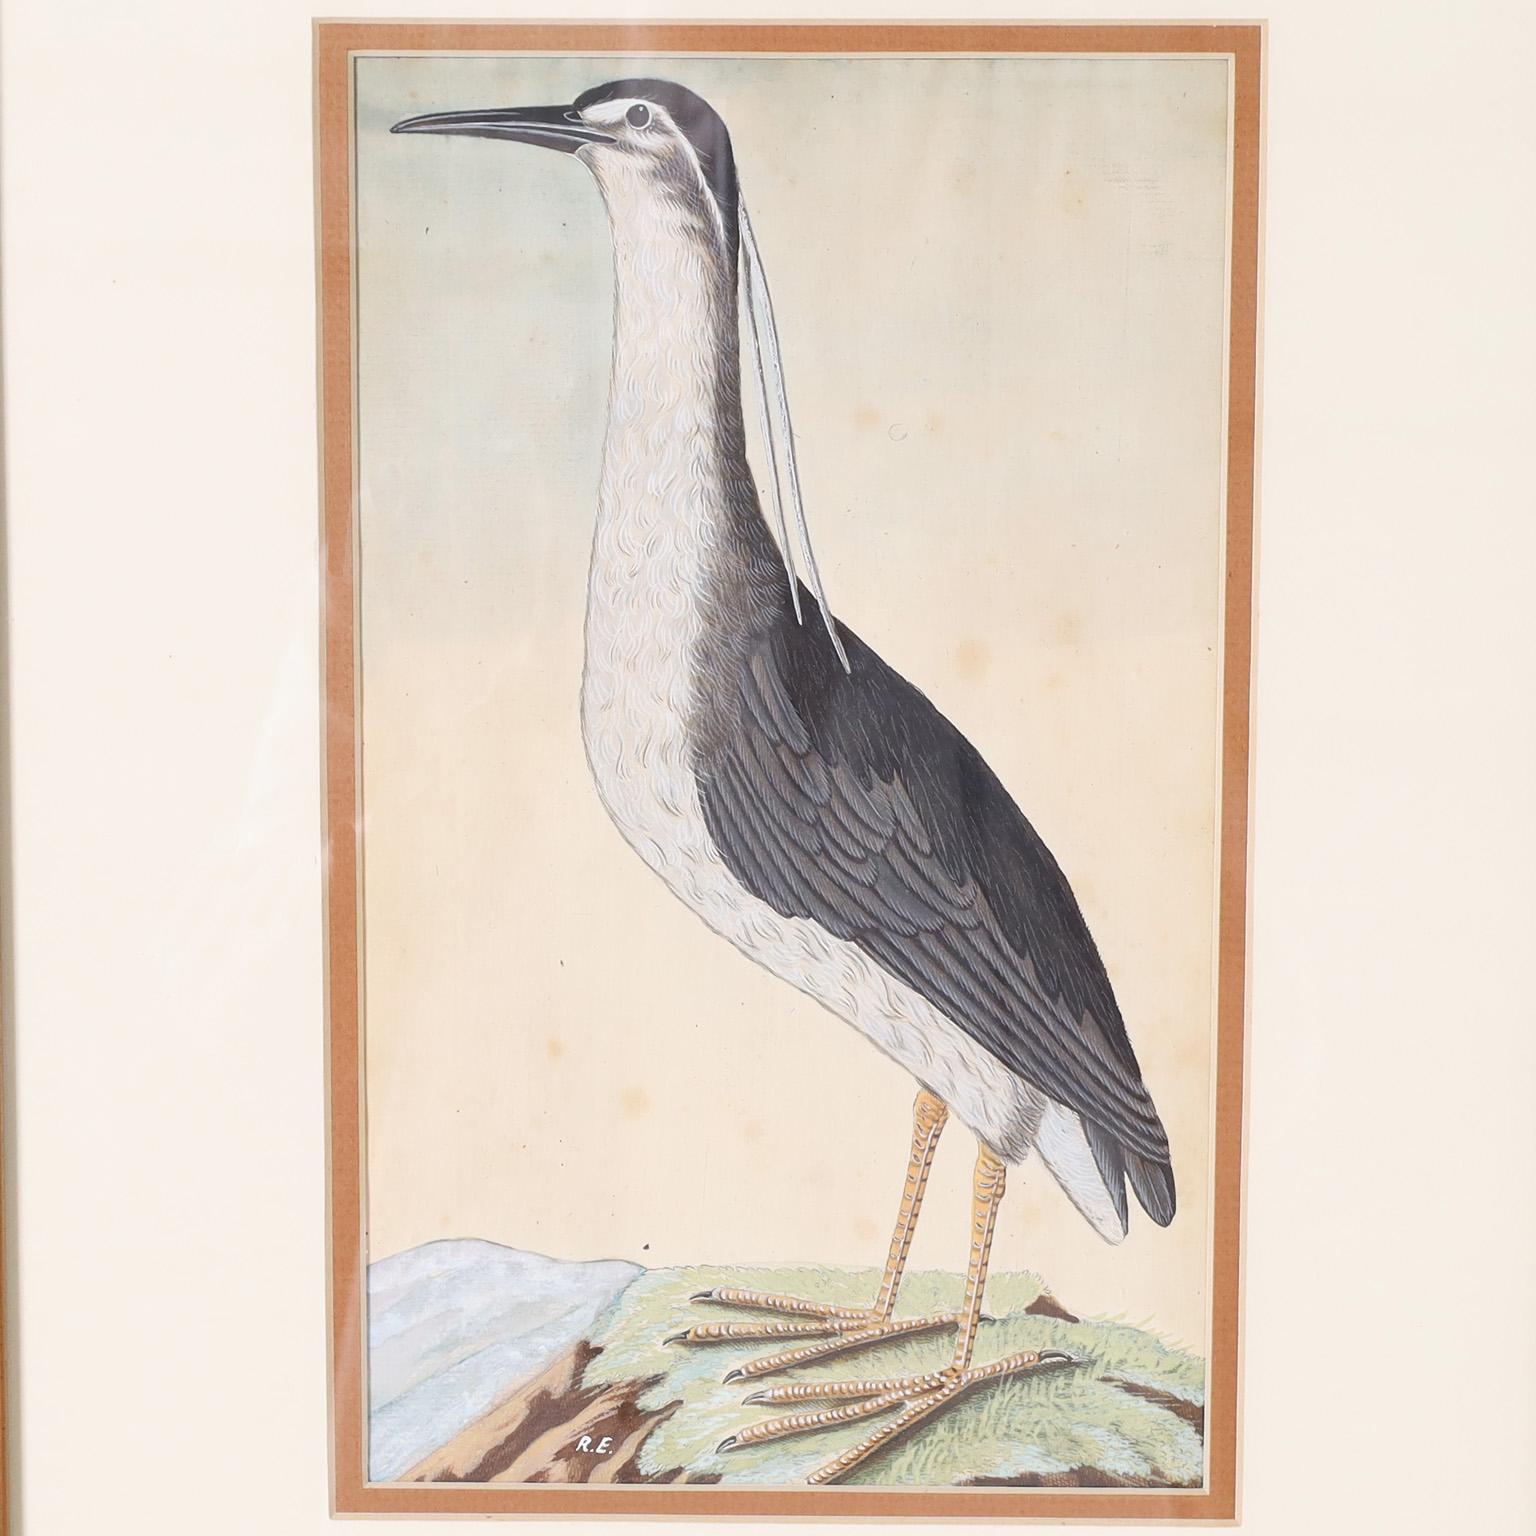 Intriguing image of a black crowned night heron with its distinctive white plume executed in a naturalist style with watercolor and gouache. Signed R.E. and presented under glass in a wood frame with silver leaf.